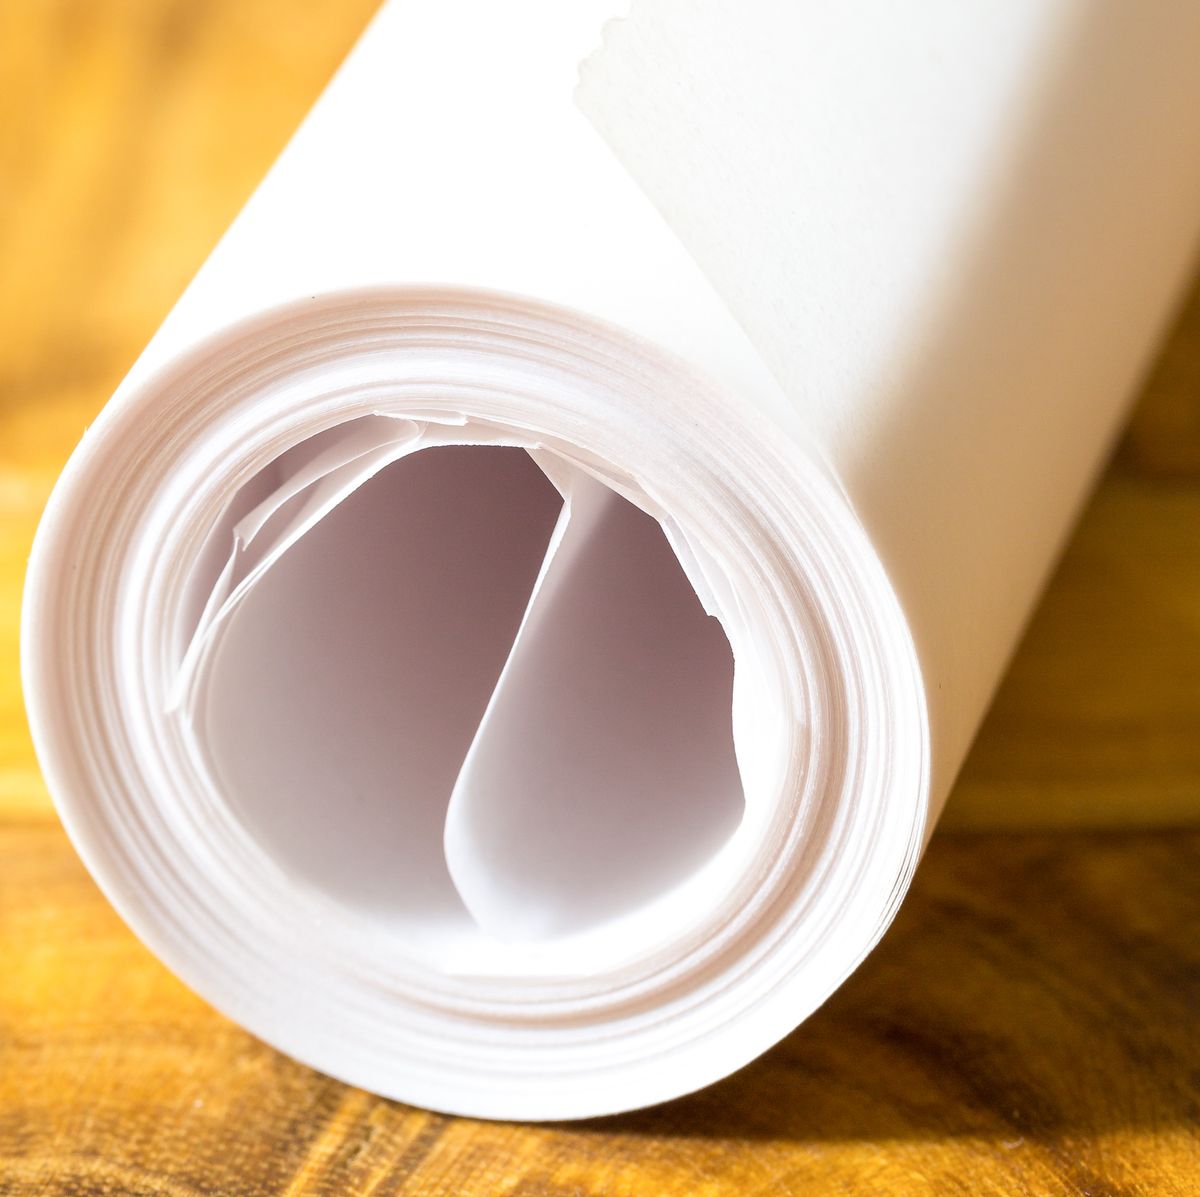 Kinds of grease proof paper. Parchment paper, baking paper, and